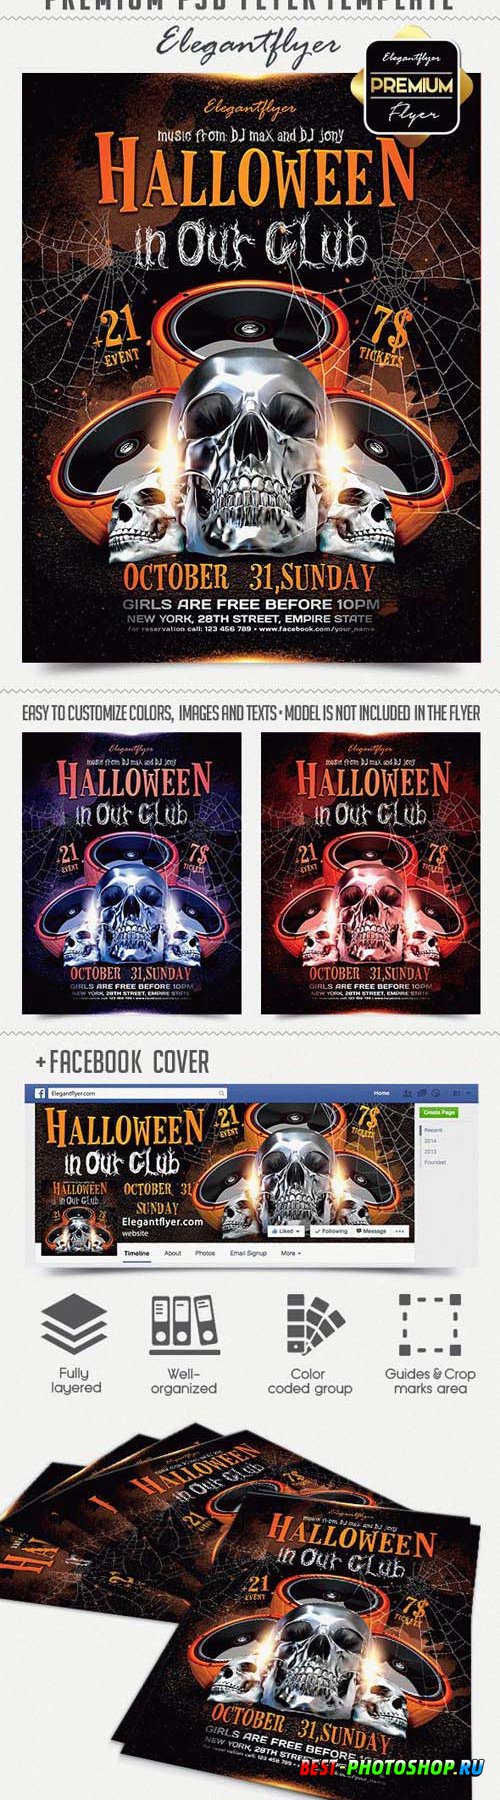 Halloween in Our Club Flyer PSD Template